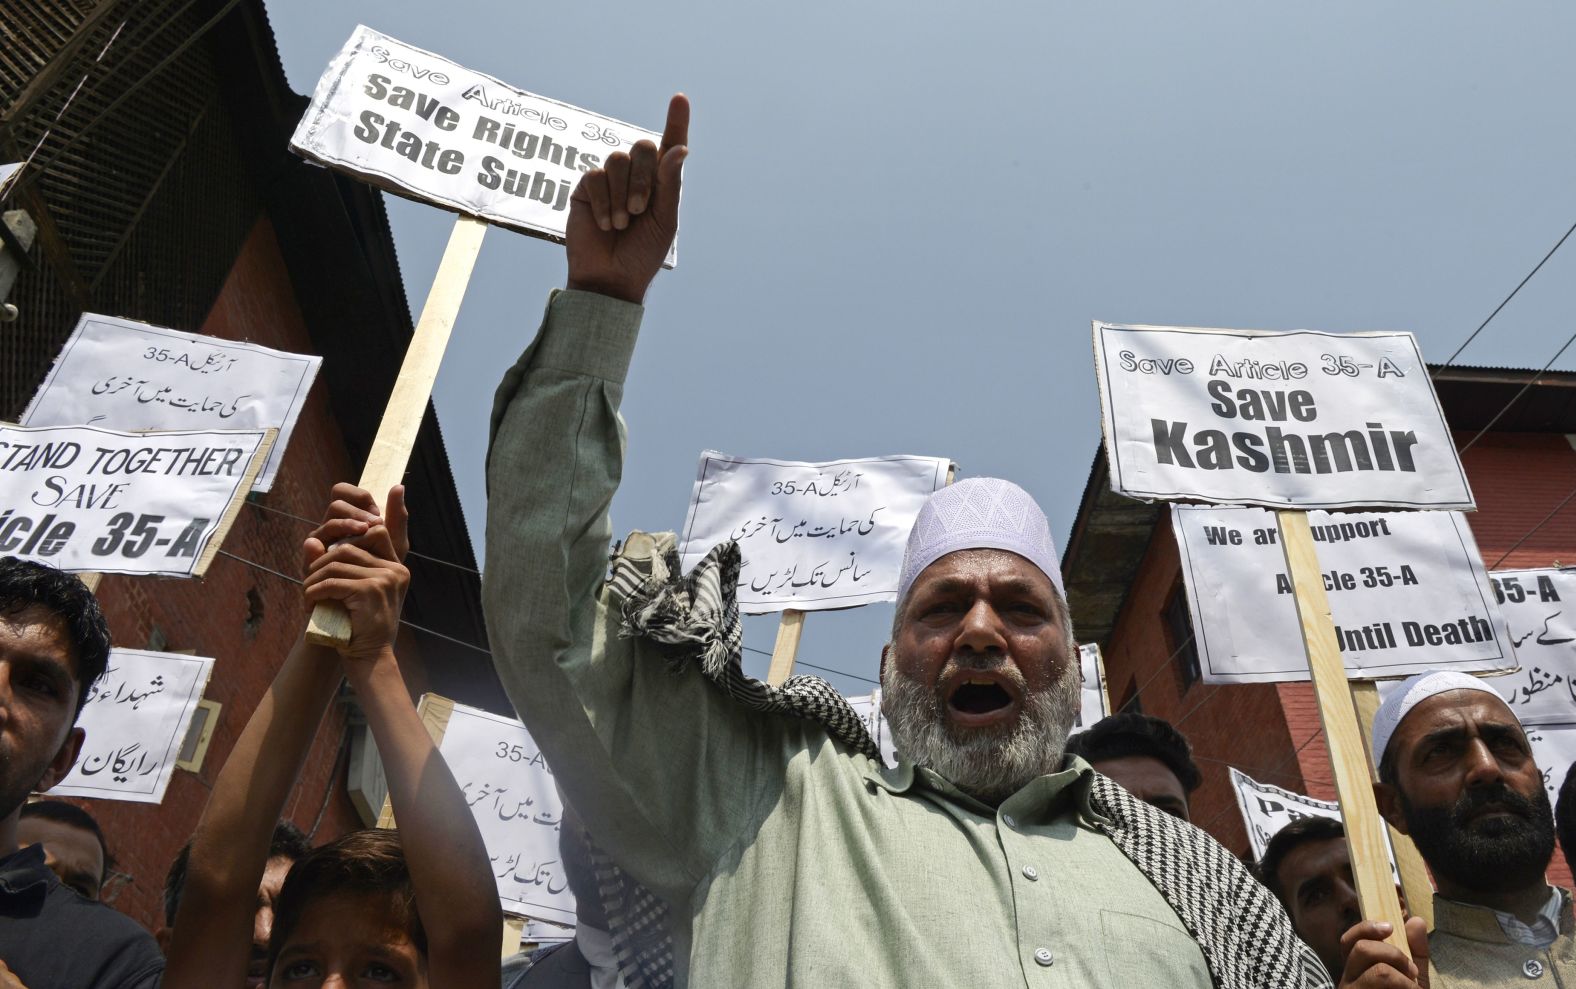 Kashmiri Shiite Muslims shout anti-Indian slogans during a demonstration against attempts to revoke Kashmir's special status, in Srinagar on August 24, 2018. A year later, India's Prime Minister Narendra Modi revoked Article 370, which was in place since 1949 and gave the states of Jammu and Kashmir the power to have their own constitution, flag and autonomy over all matters, save for certain policy areas such as a foreign affairs and defense.